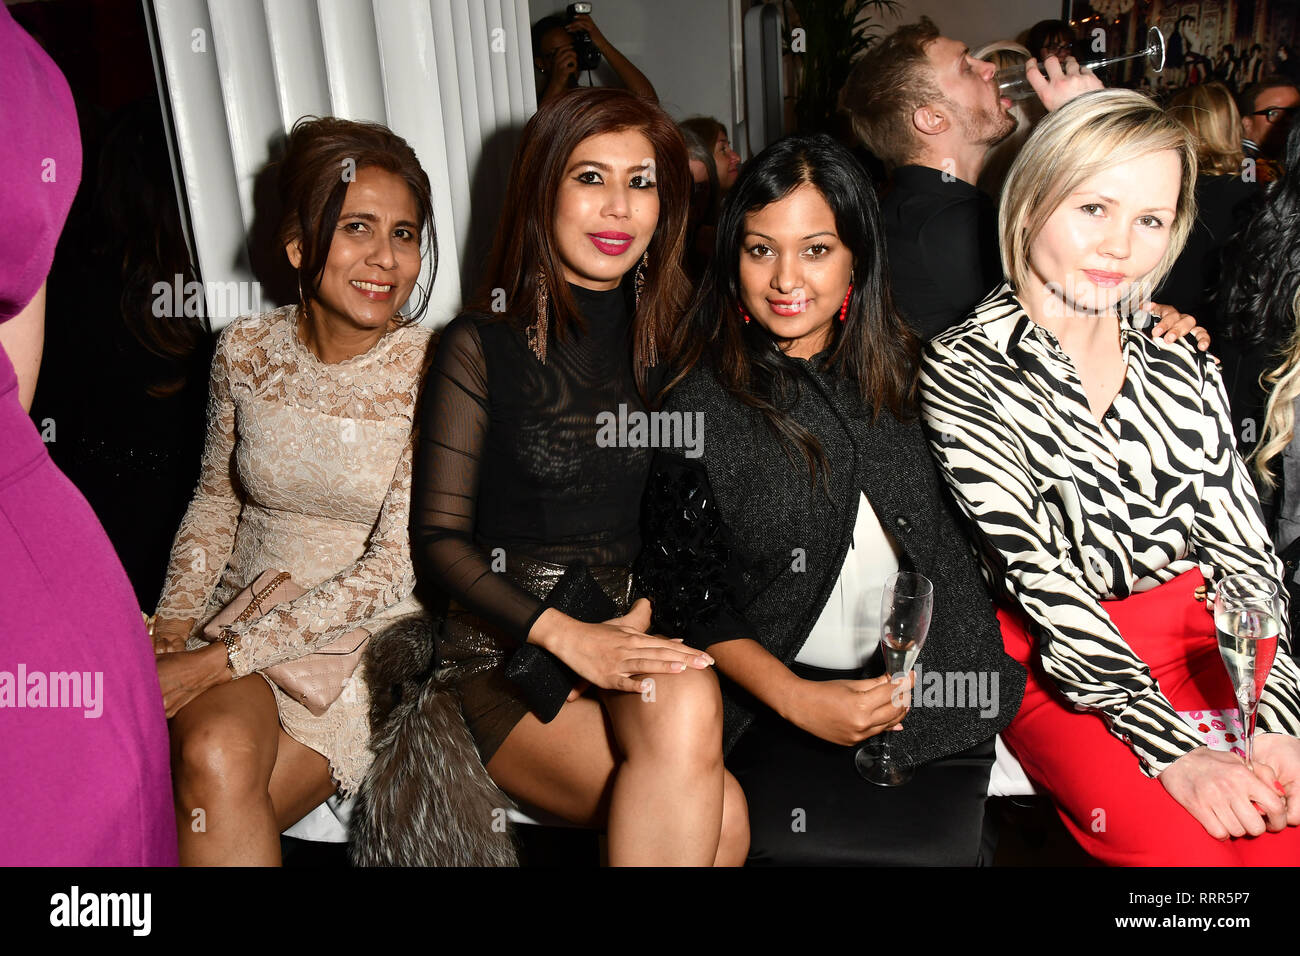 London, UK. 26th Feb 2019. Arrivers at Nina Naustdal catwalk show SS19/20 collection by The London School of Beauty & Make-up at Bagatelle on 26 Feb 2019, London, UK. Credit: Picture Capital/Alamy Live News Stock Photo